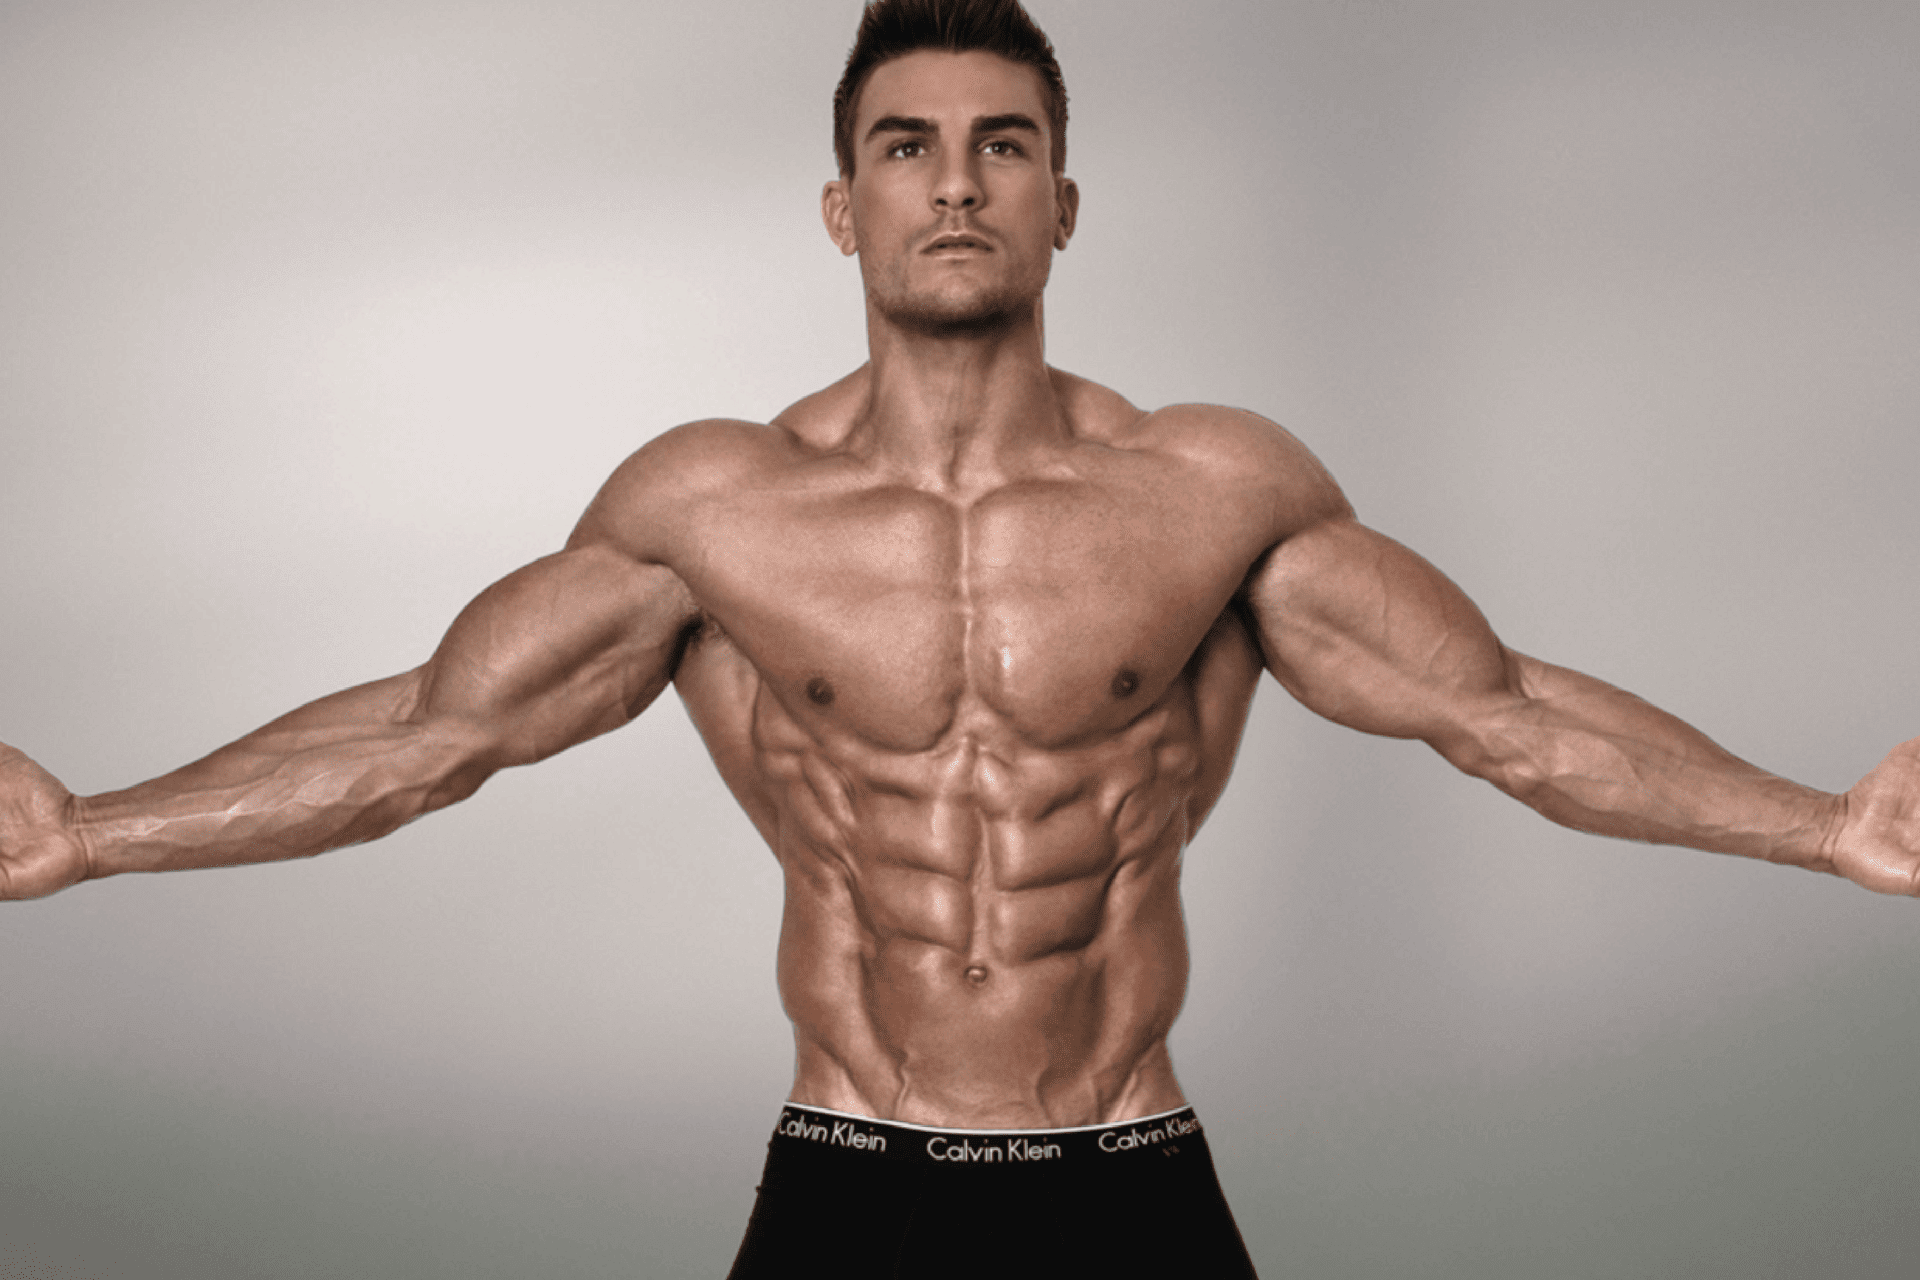 Supplements to help get ripped